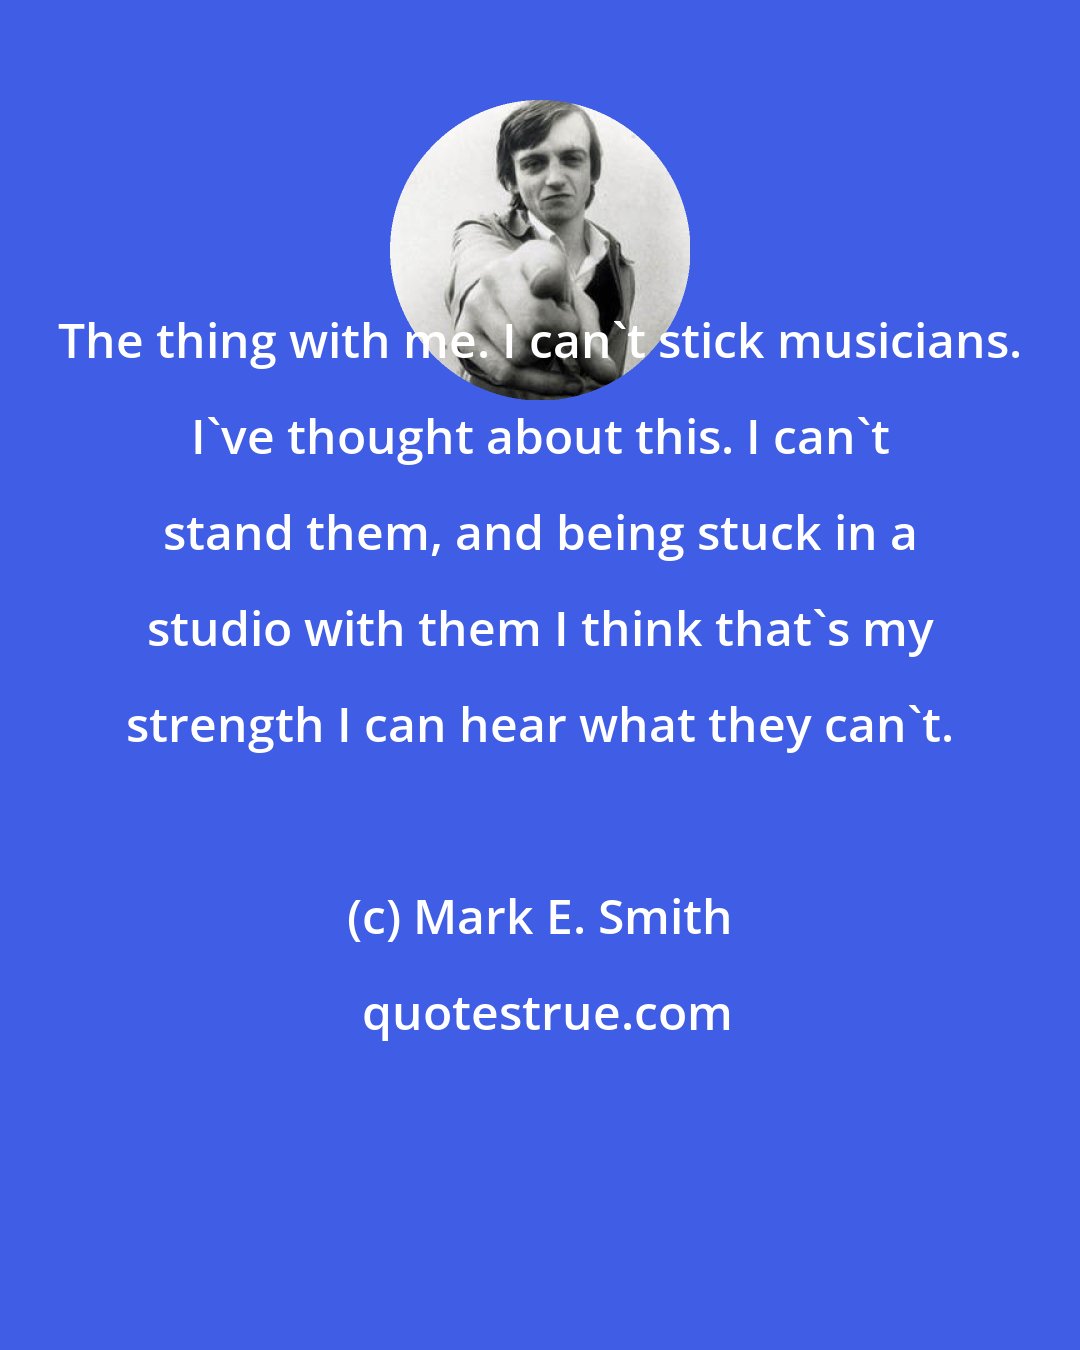 Mark E. Smith: The thing with me. I can't stick musicians. I've thought about this. I can't stand them, and being stuck in a studio with them I think that's my strength I can hear what they can't.